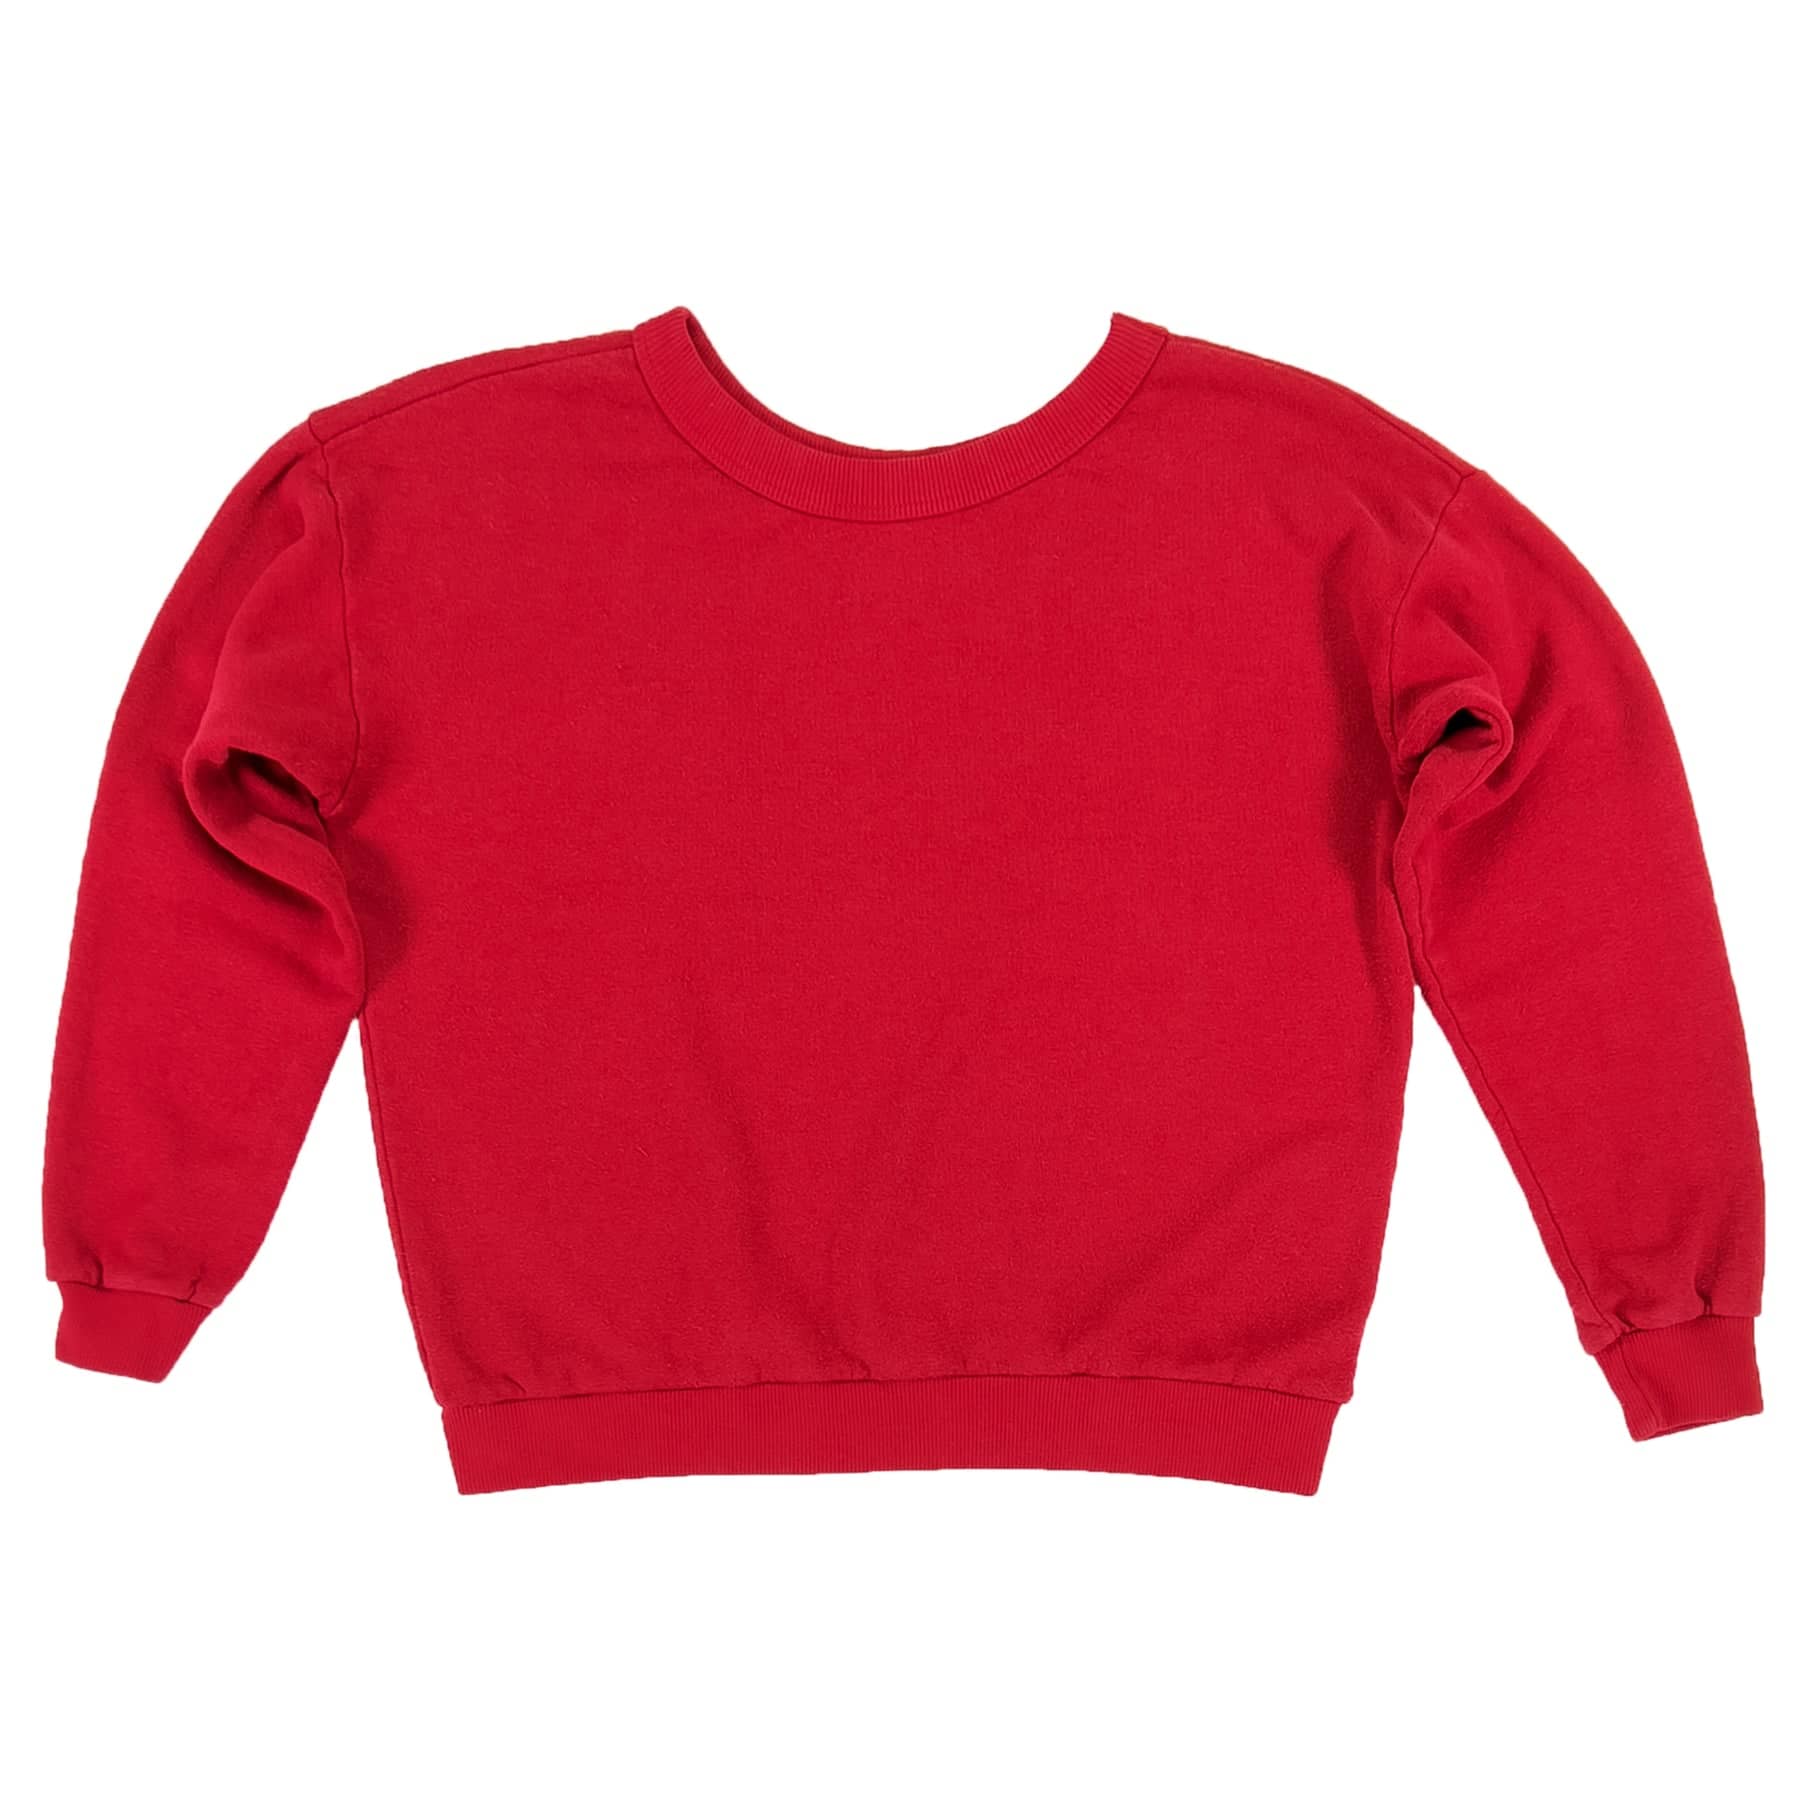 Crux Cropped Feminine Fit Sweatshirt in Cherry Red by Jungmaven